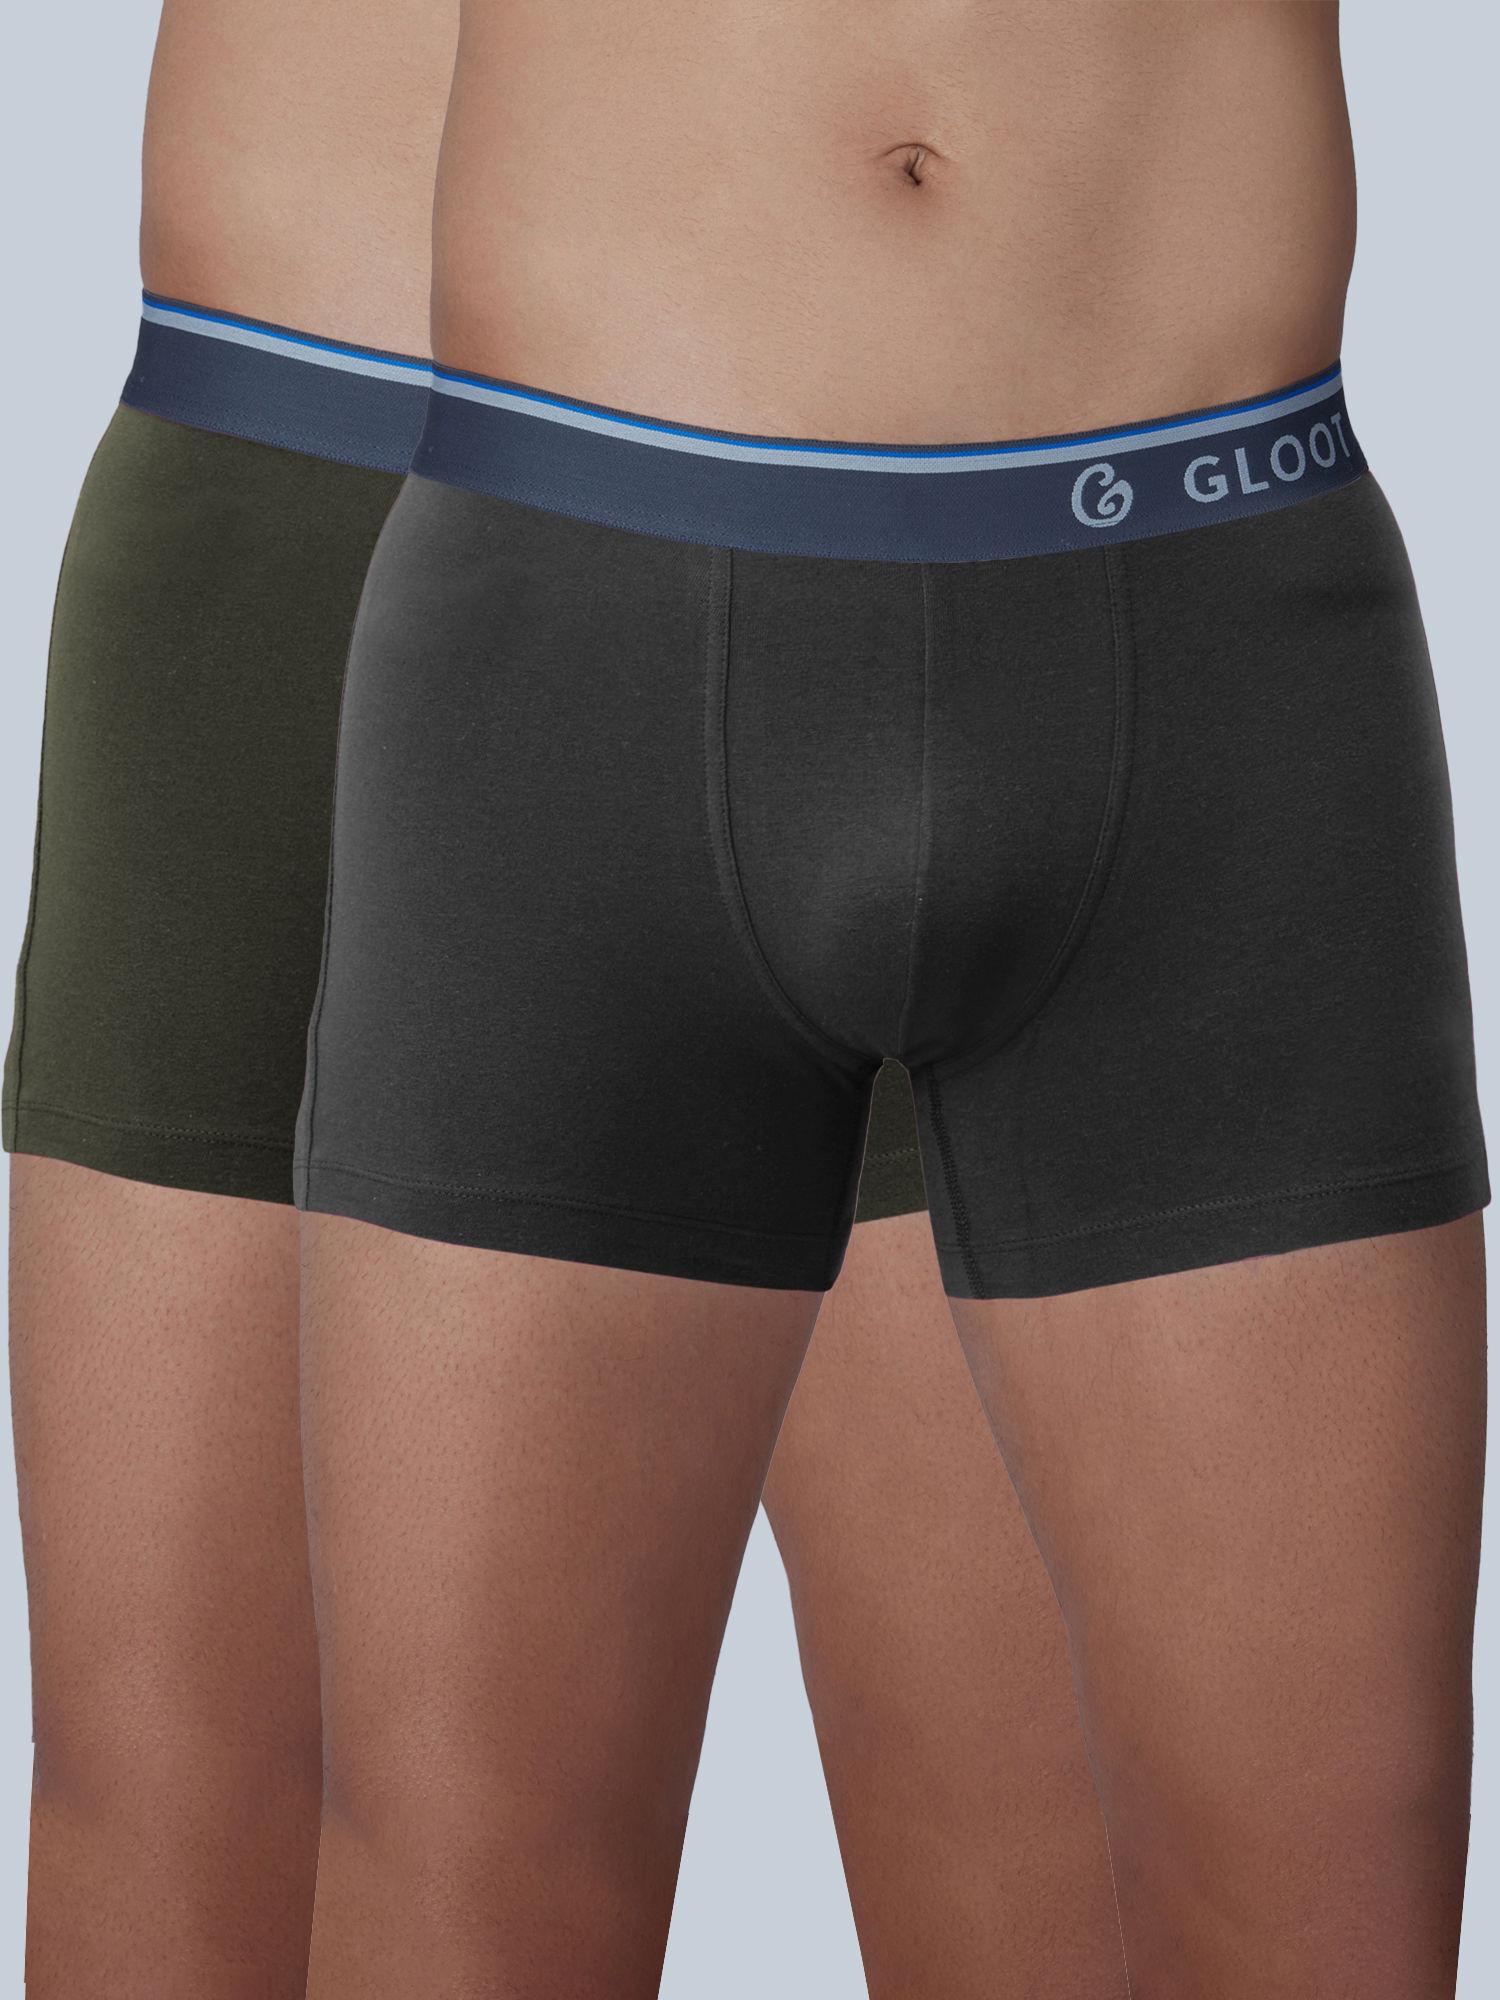 pure cotton stretch trunks with no-itch elastic and anti odour gli015 multicolor (pack of 2)